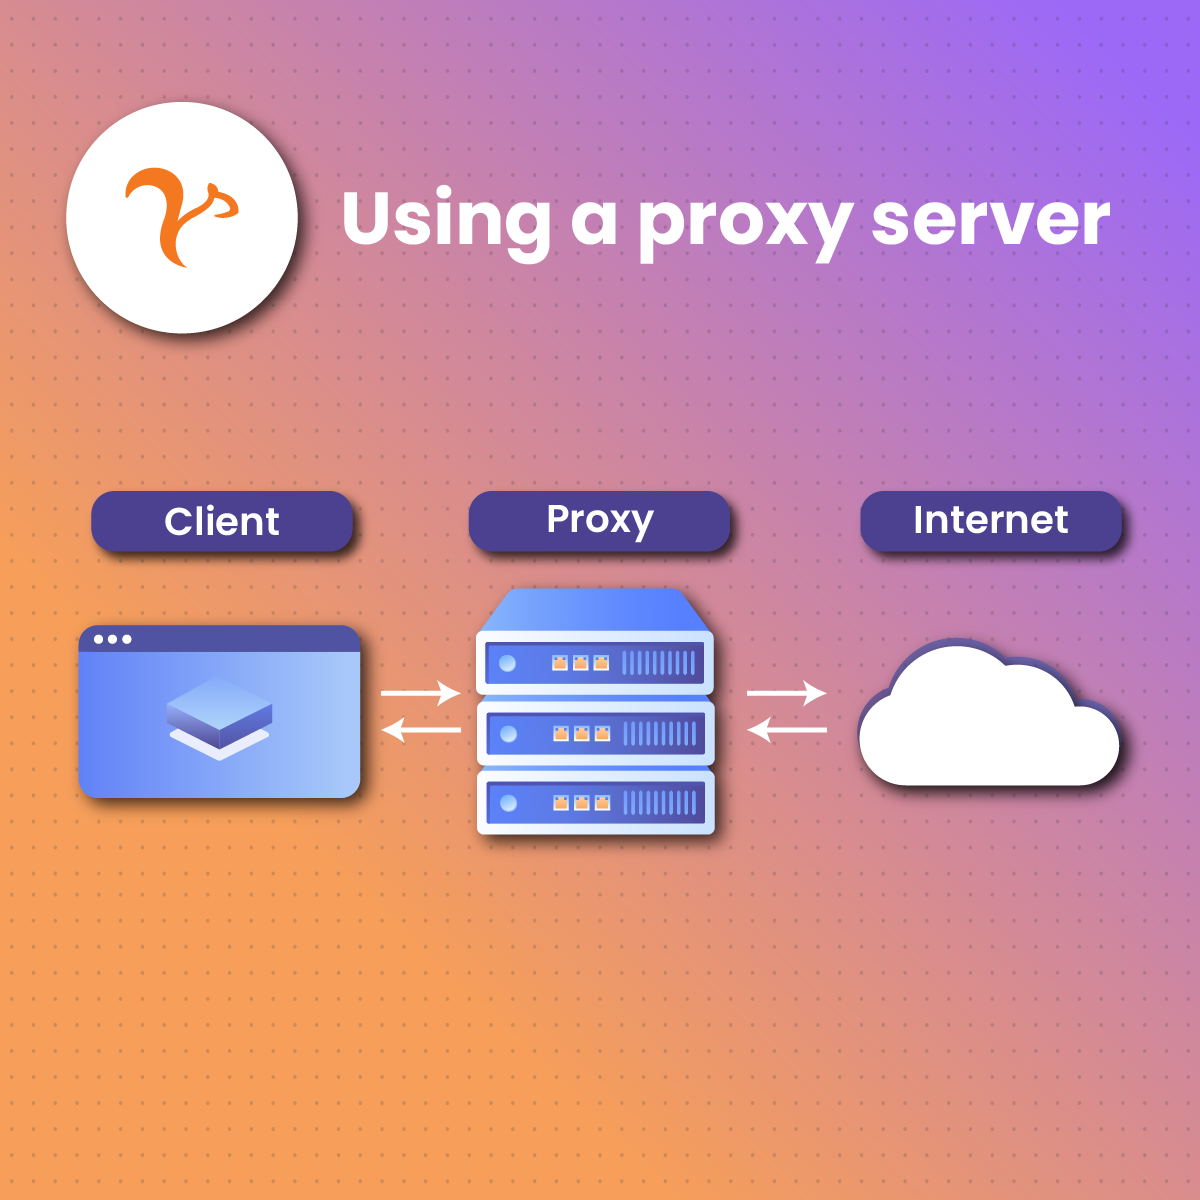 What Is a Proxy?